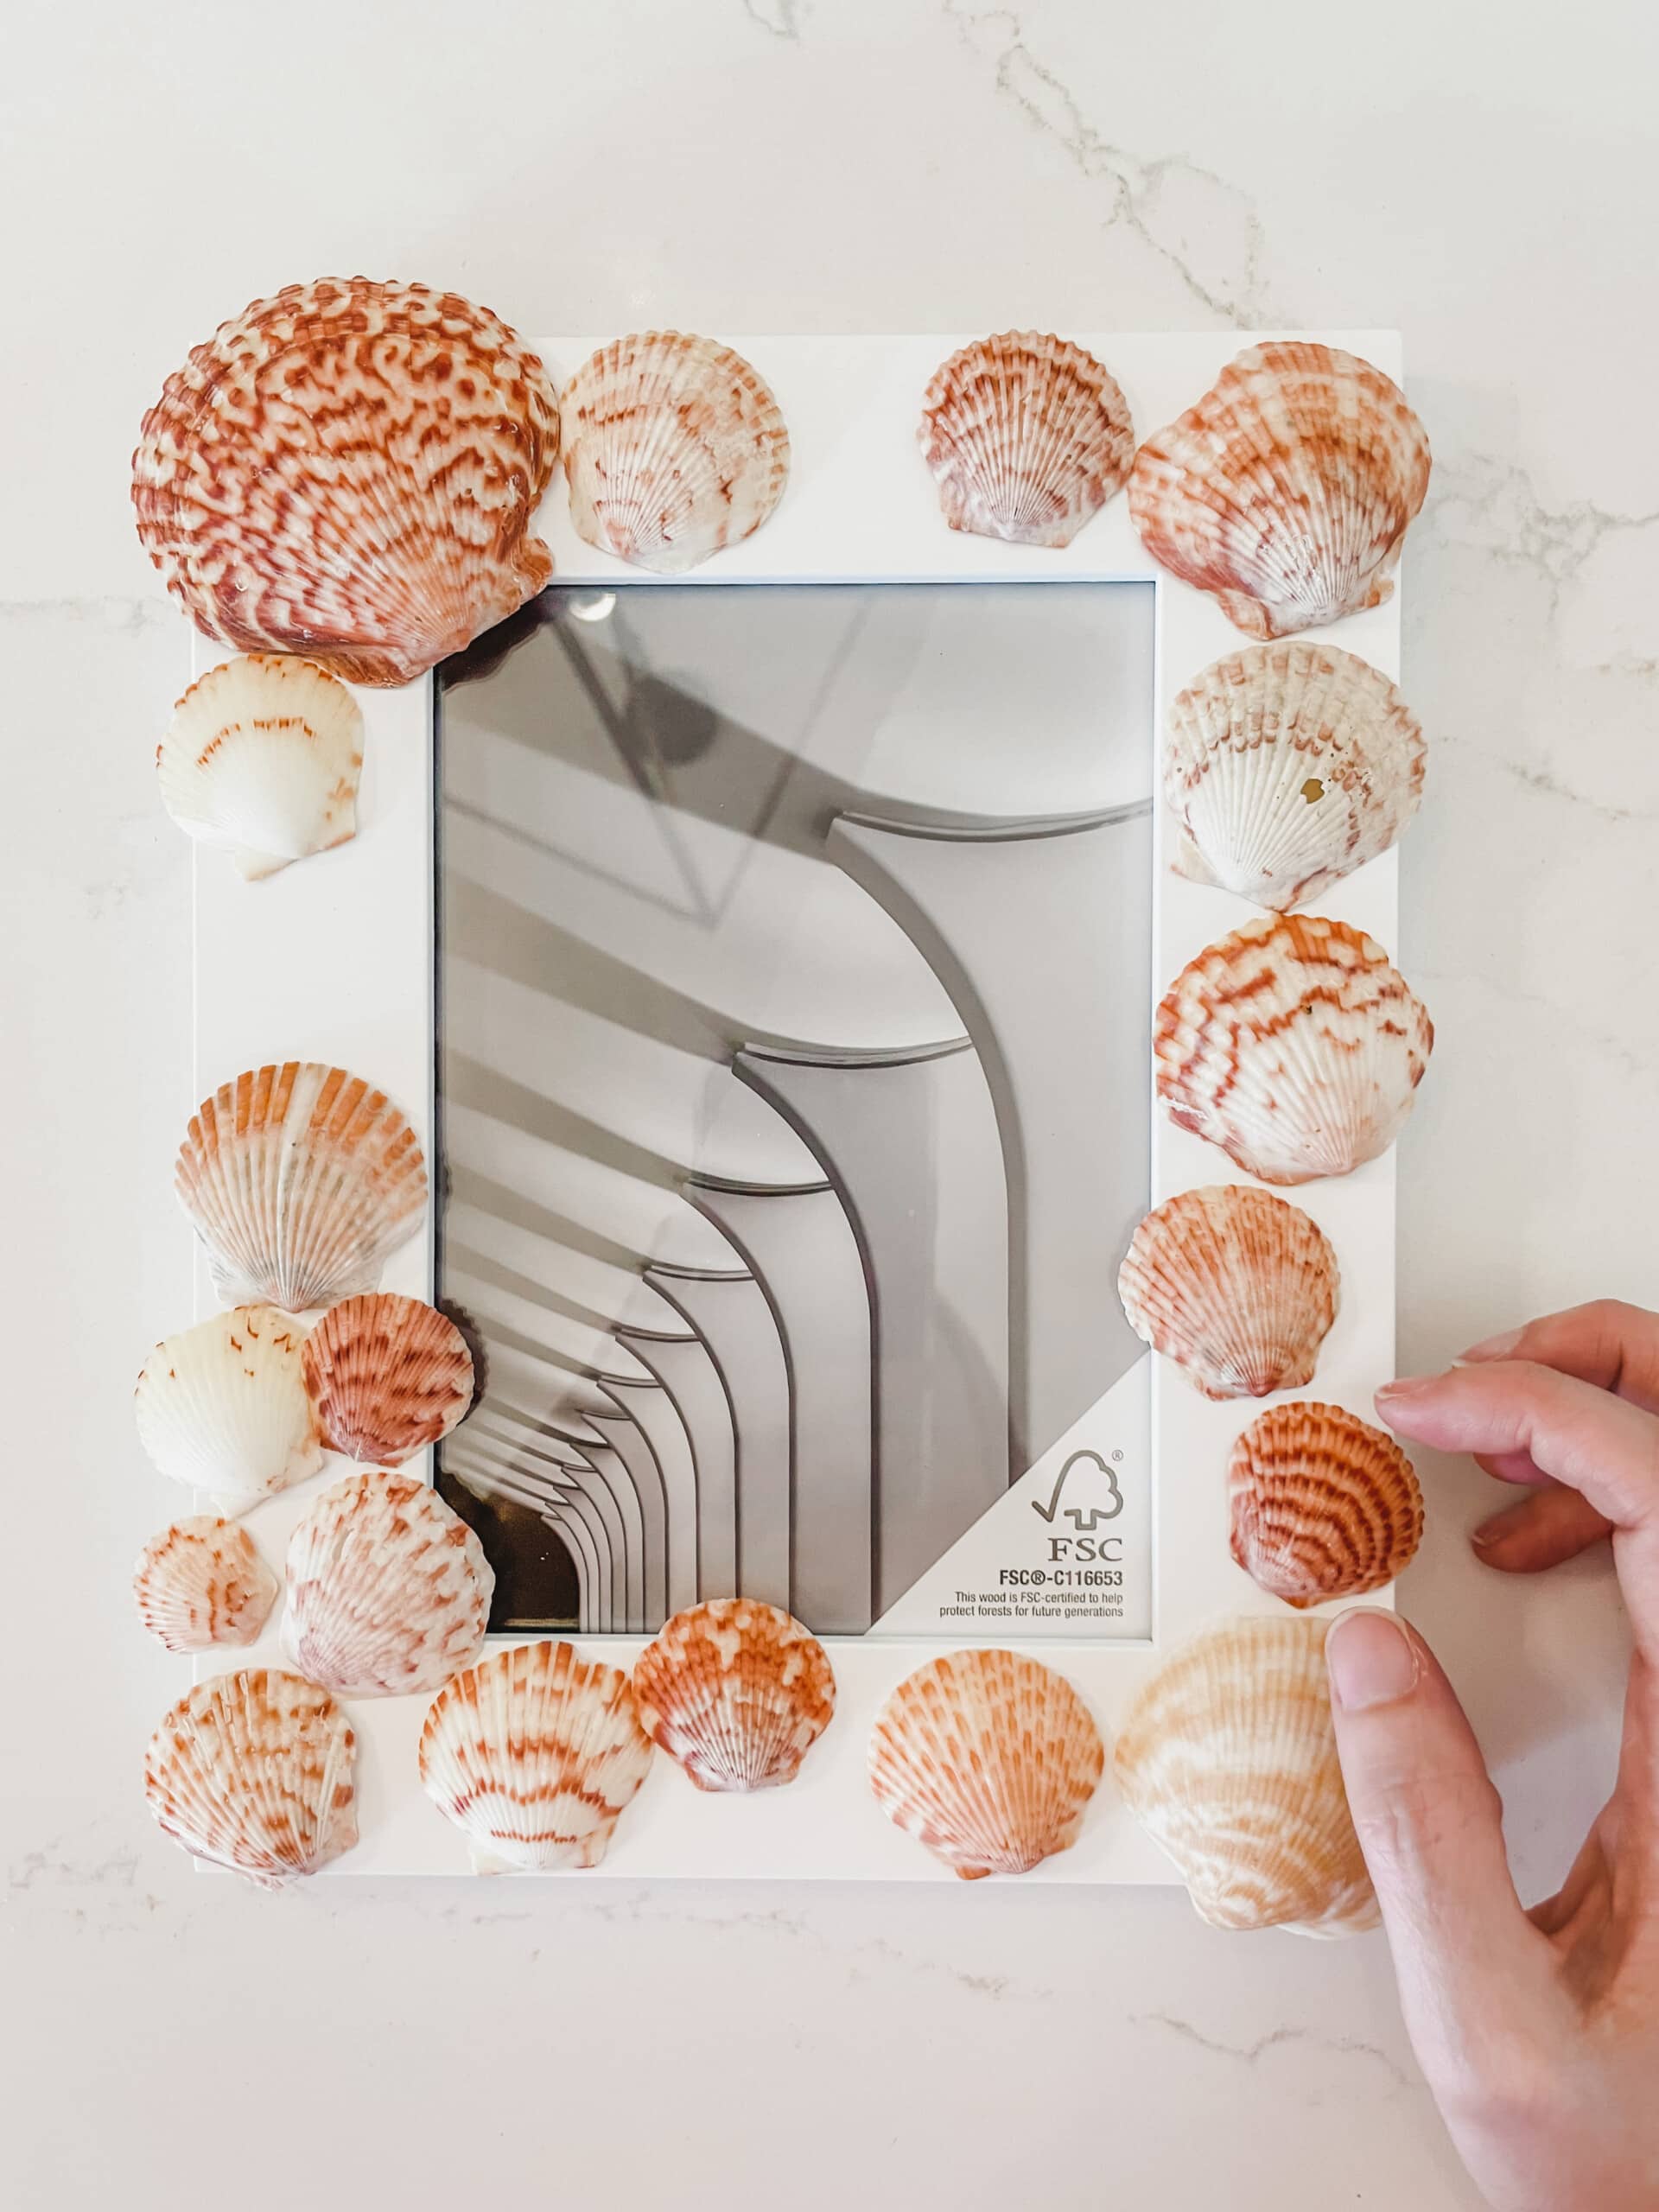 Laying seashells on a picture frame.